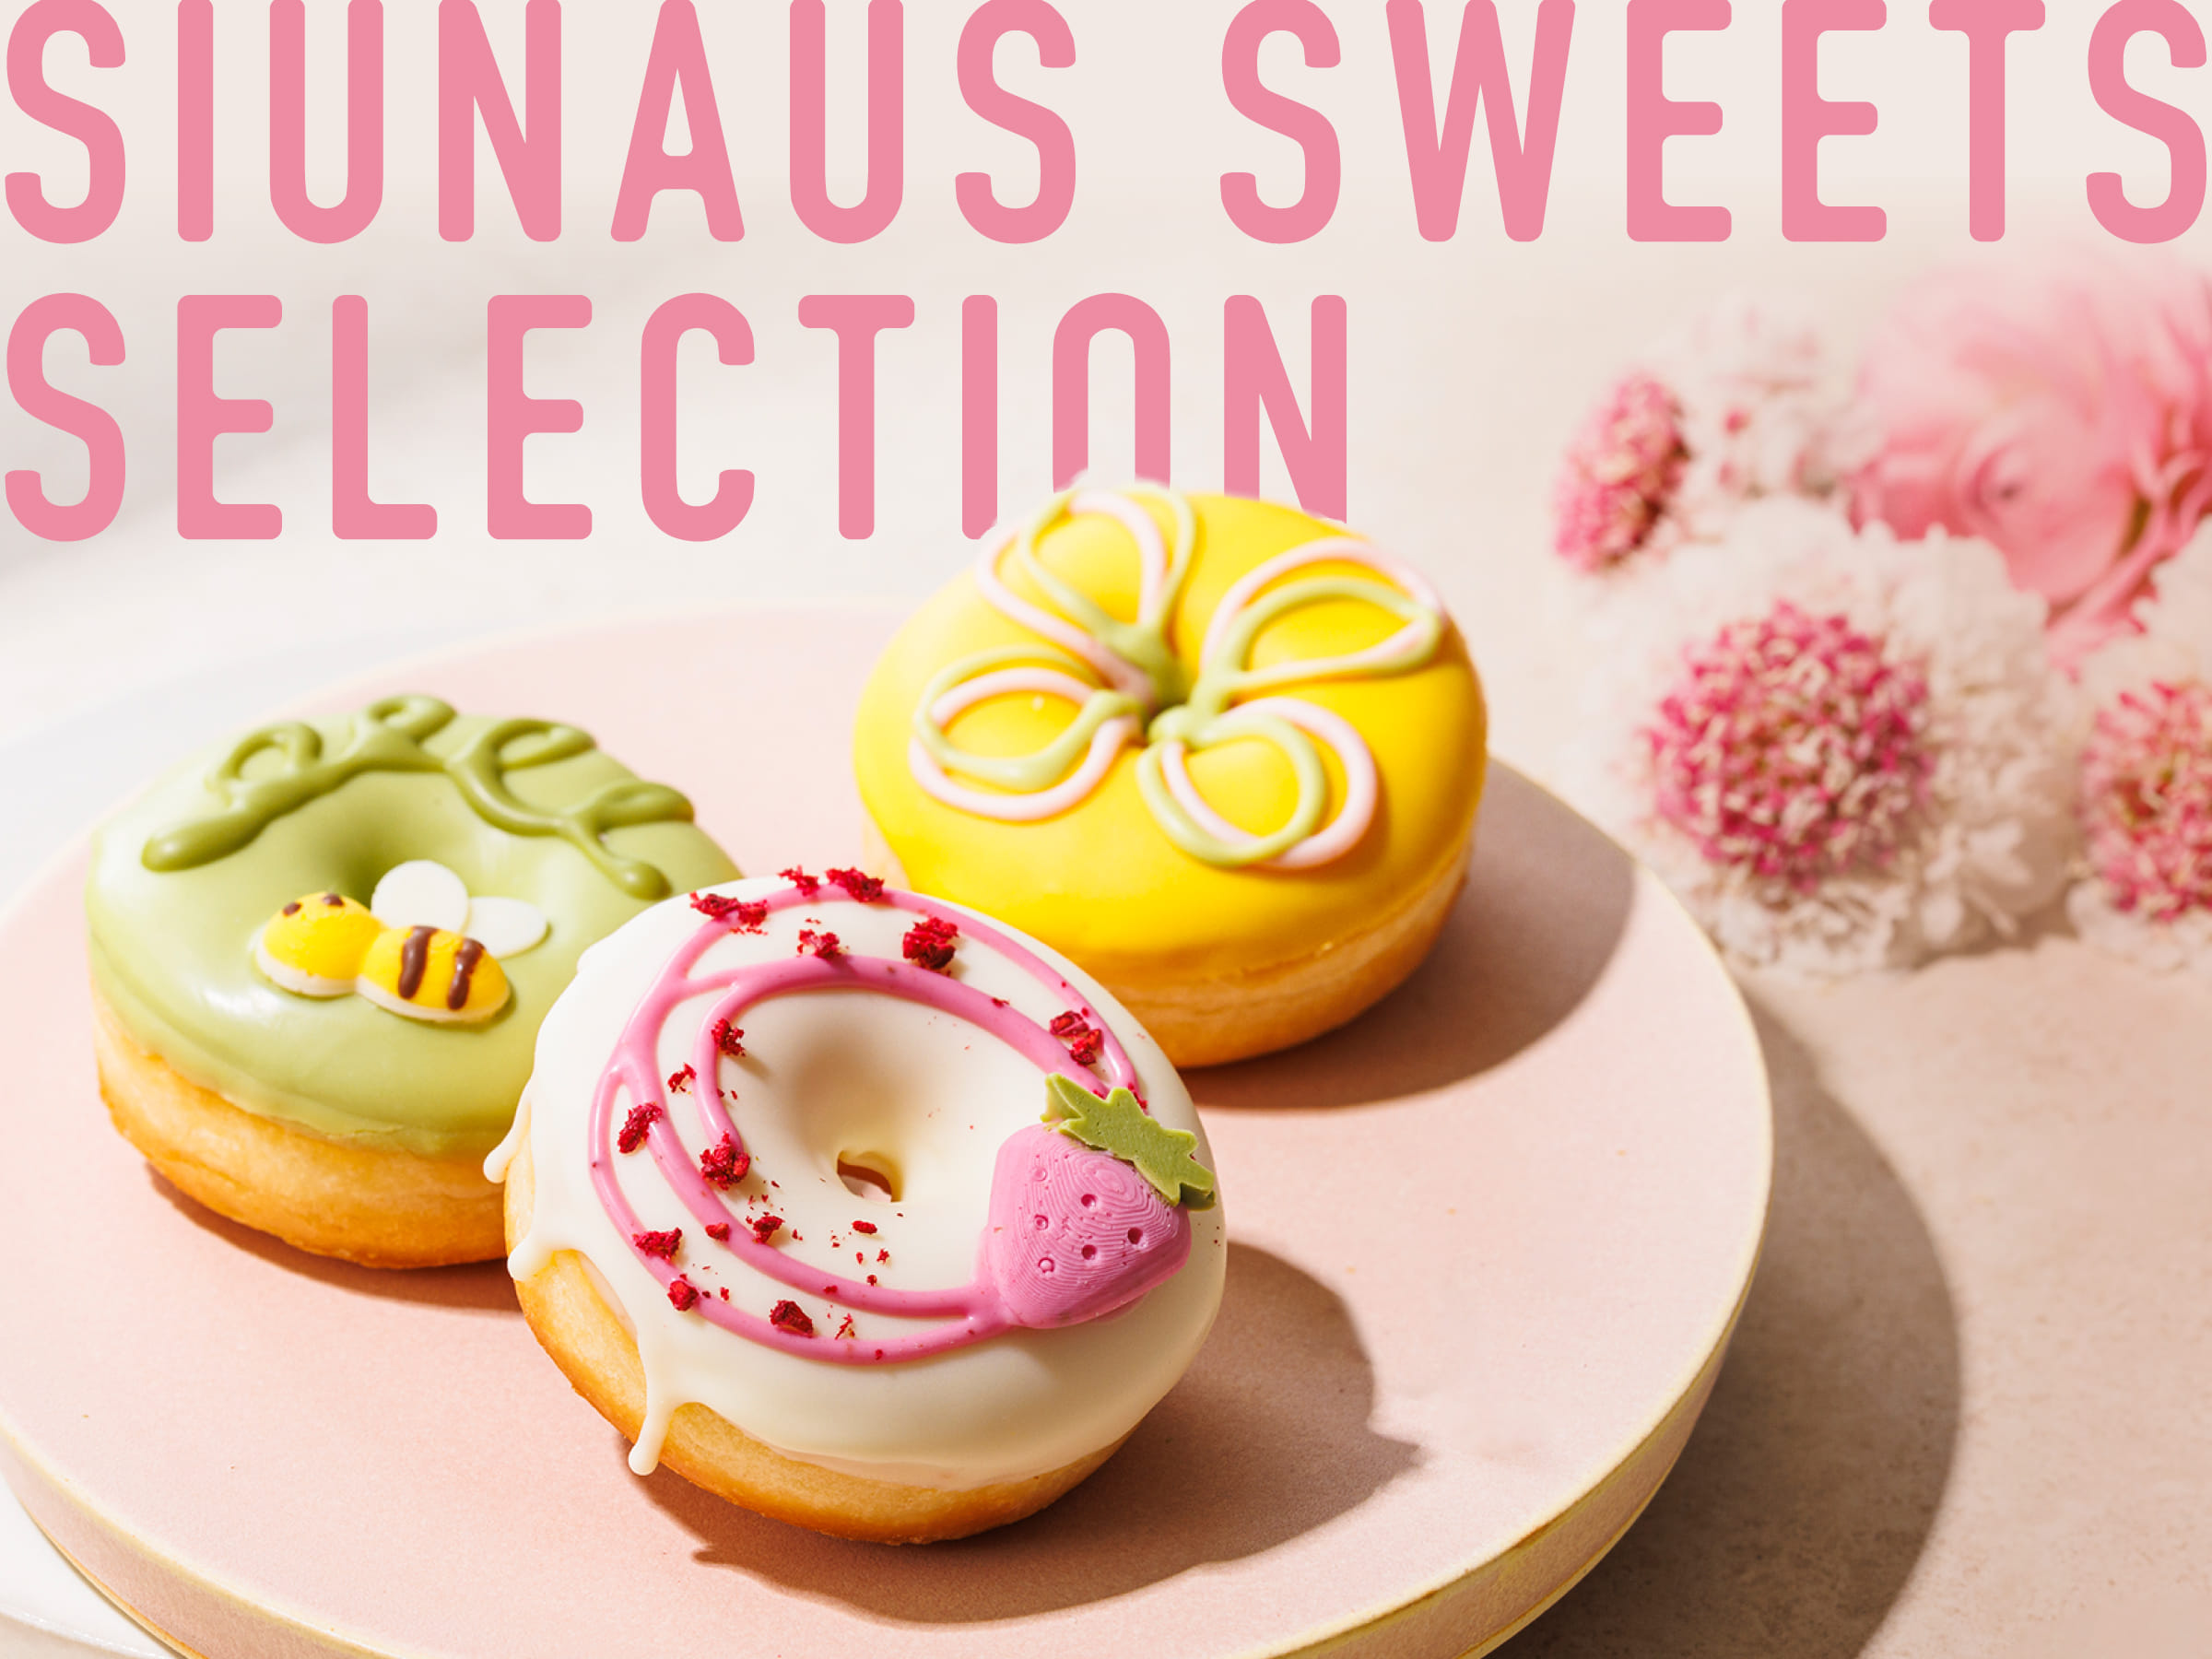 SIUNAUS SWEETS SELECTION